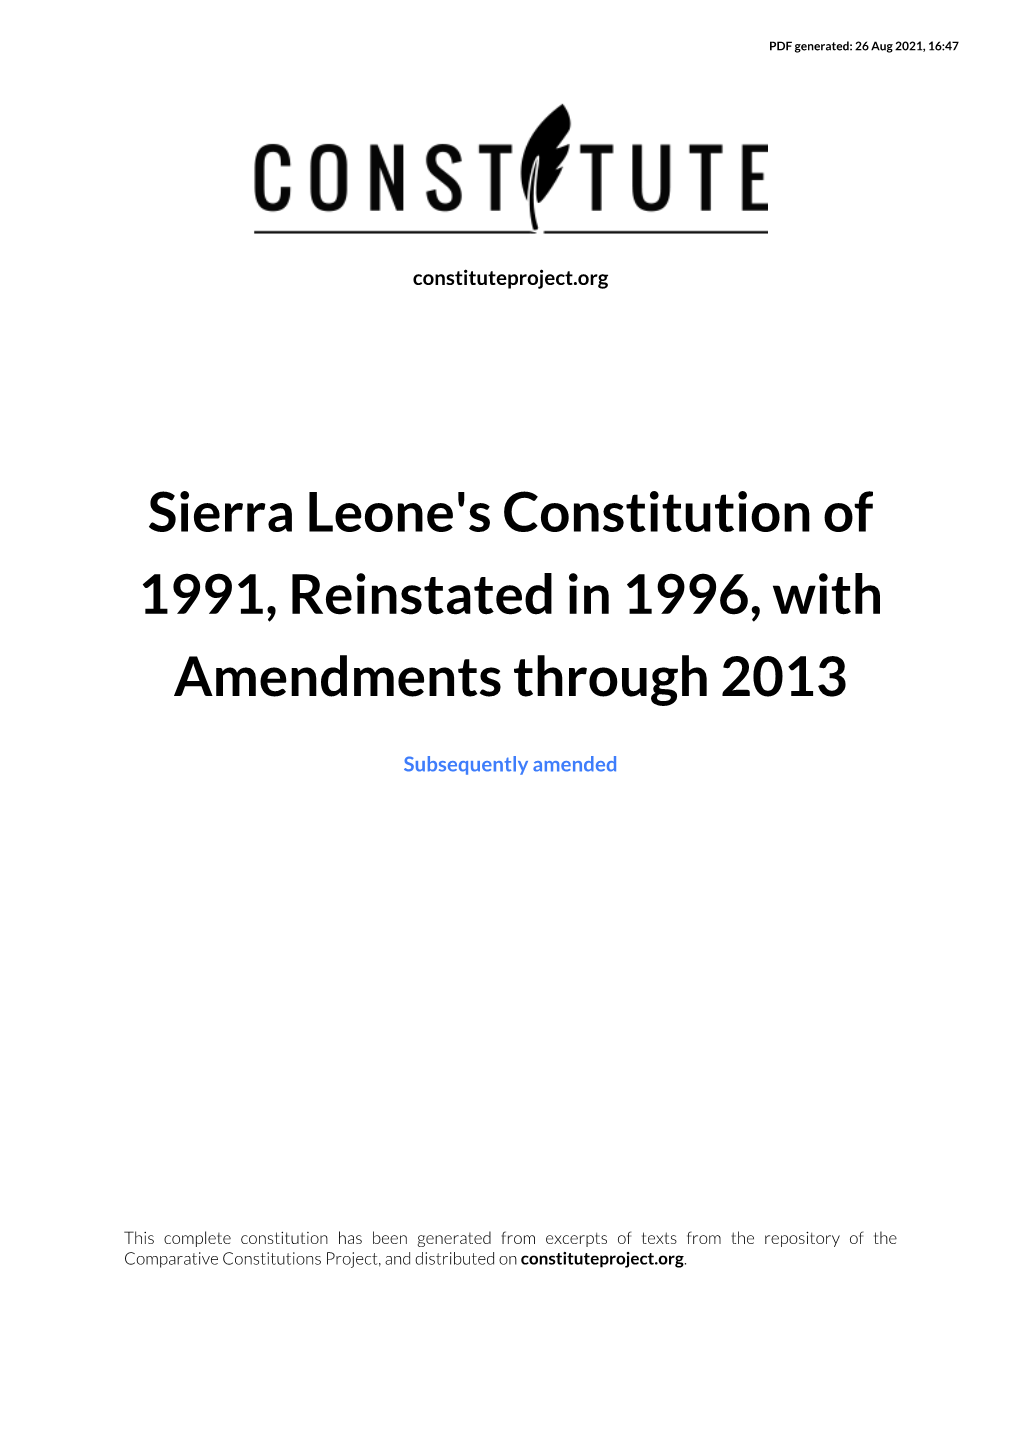 Sierra Leone's Constitution of 1991, Reinstated in 1996, with Amendments Through 2013